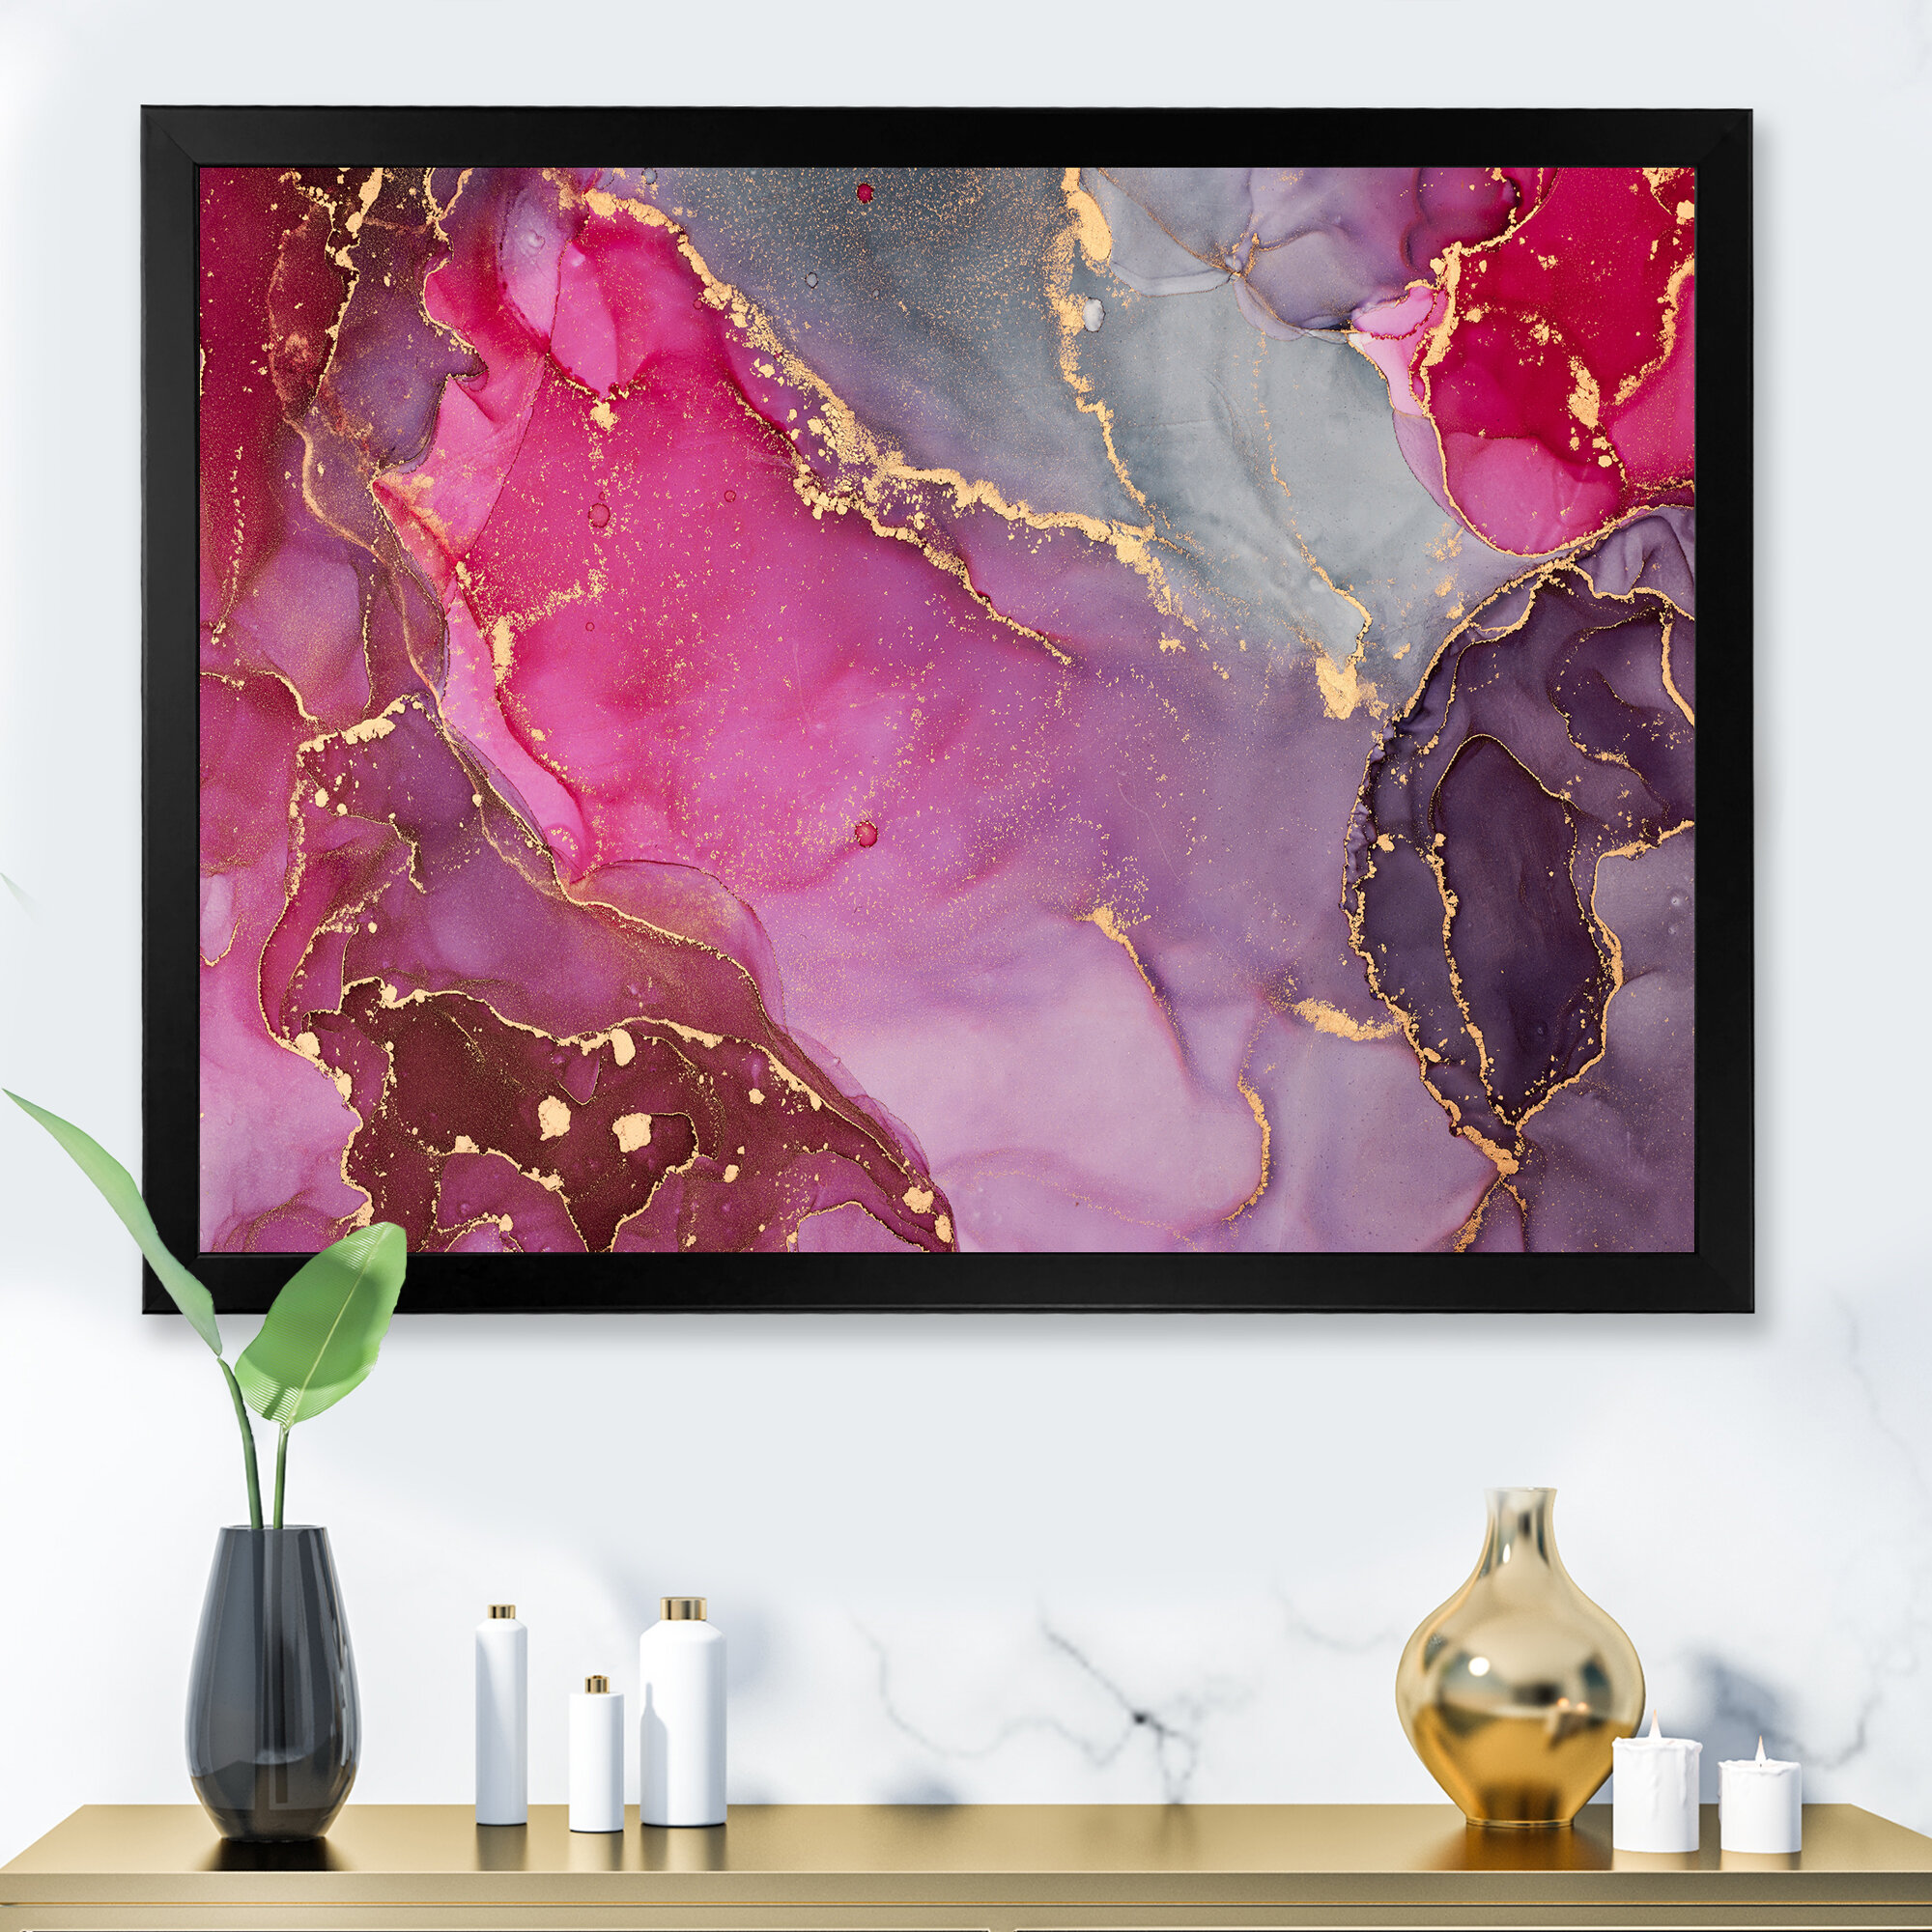 Luxury Fliud Art Abstract Trendy colorful background, fashion wall